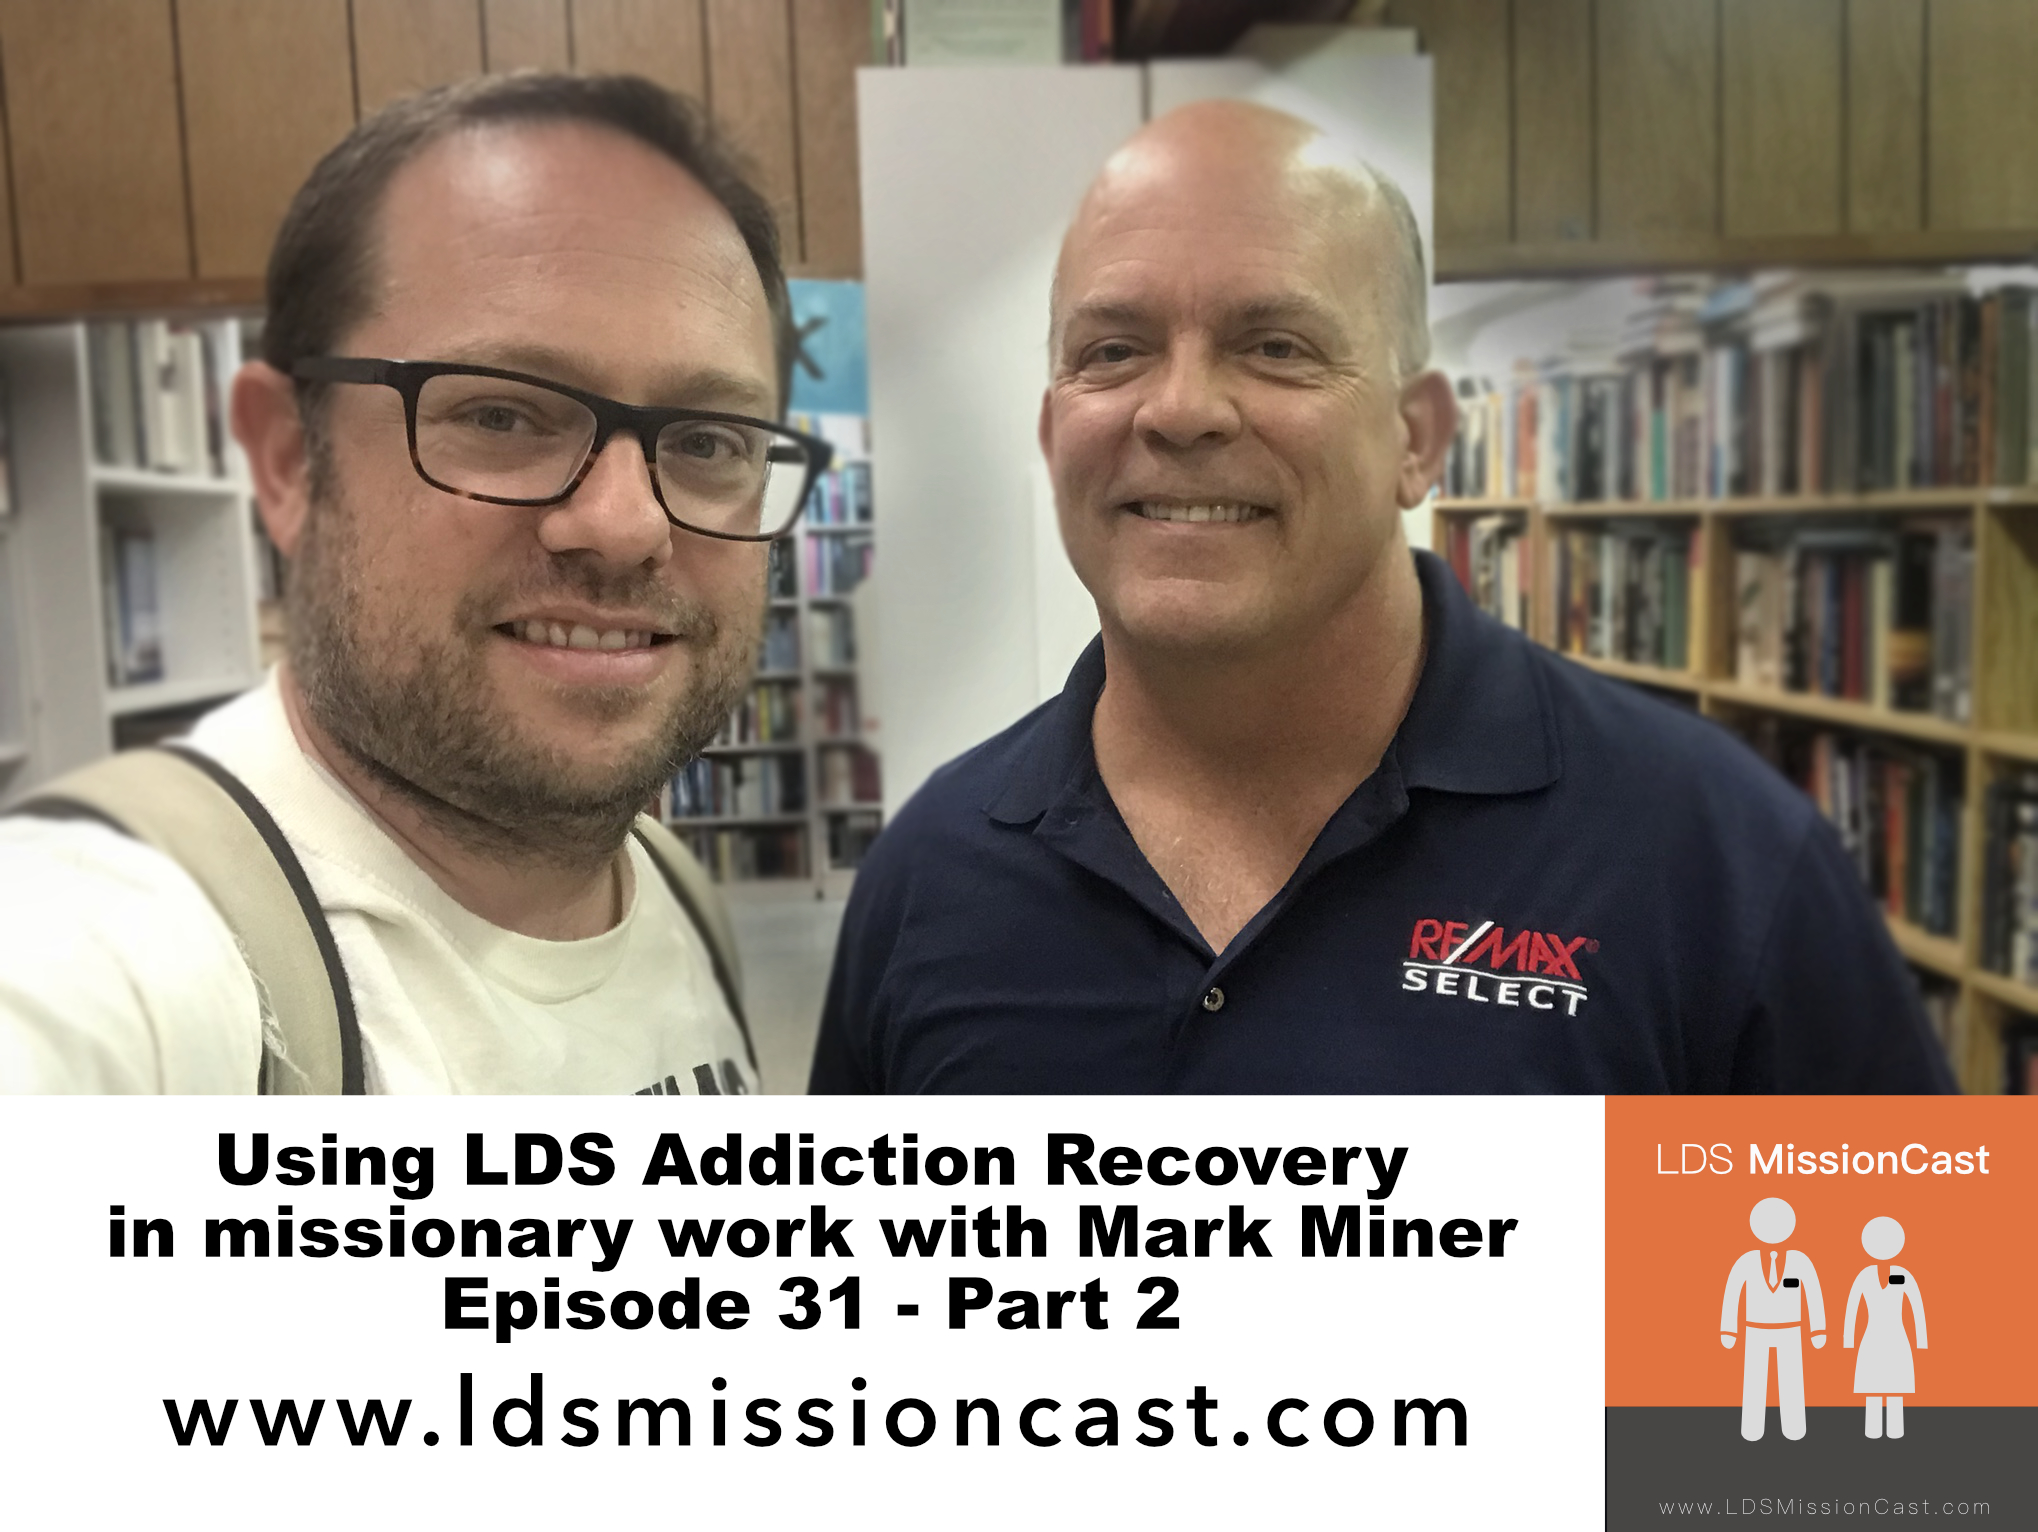 LDS Addiction Recovery